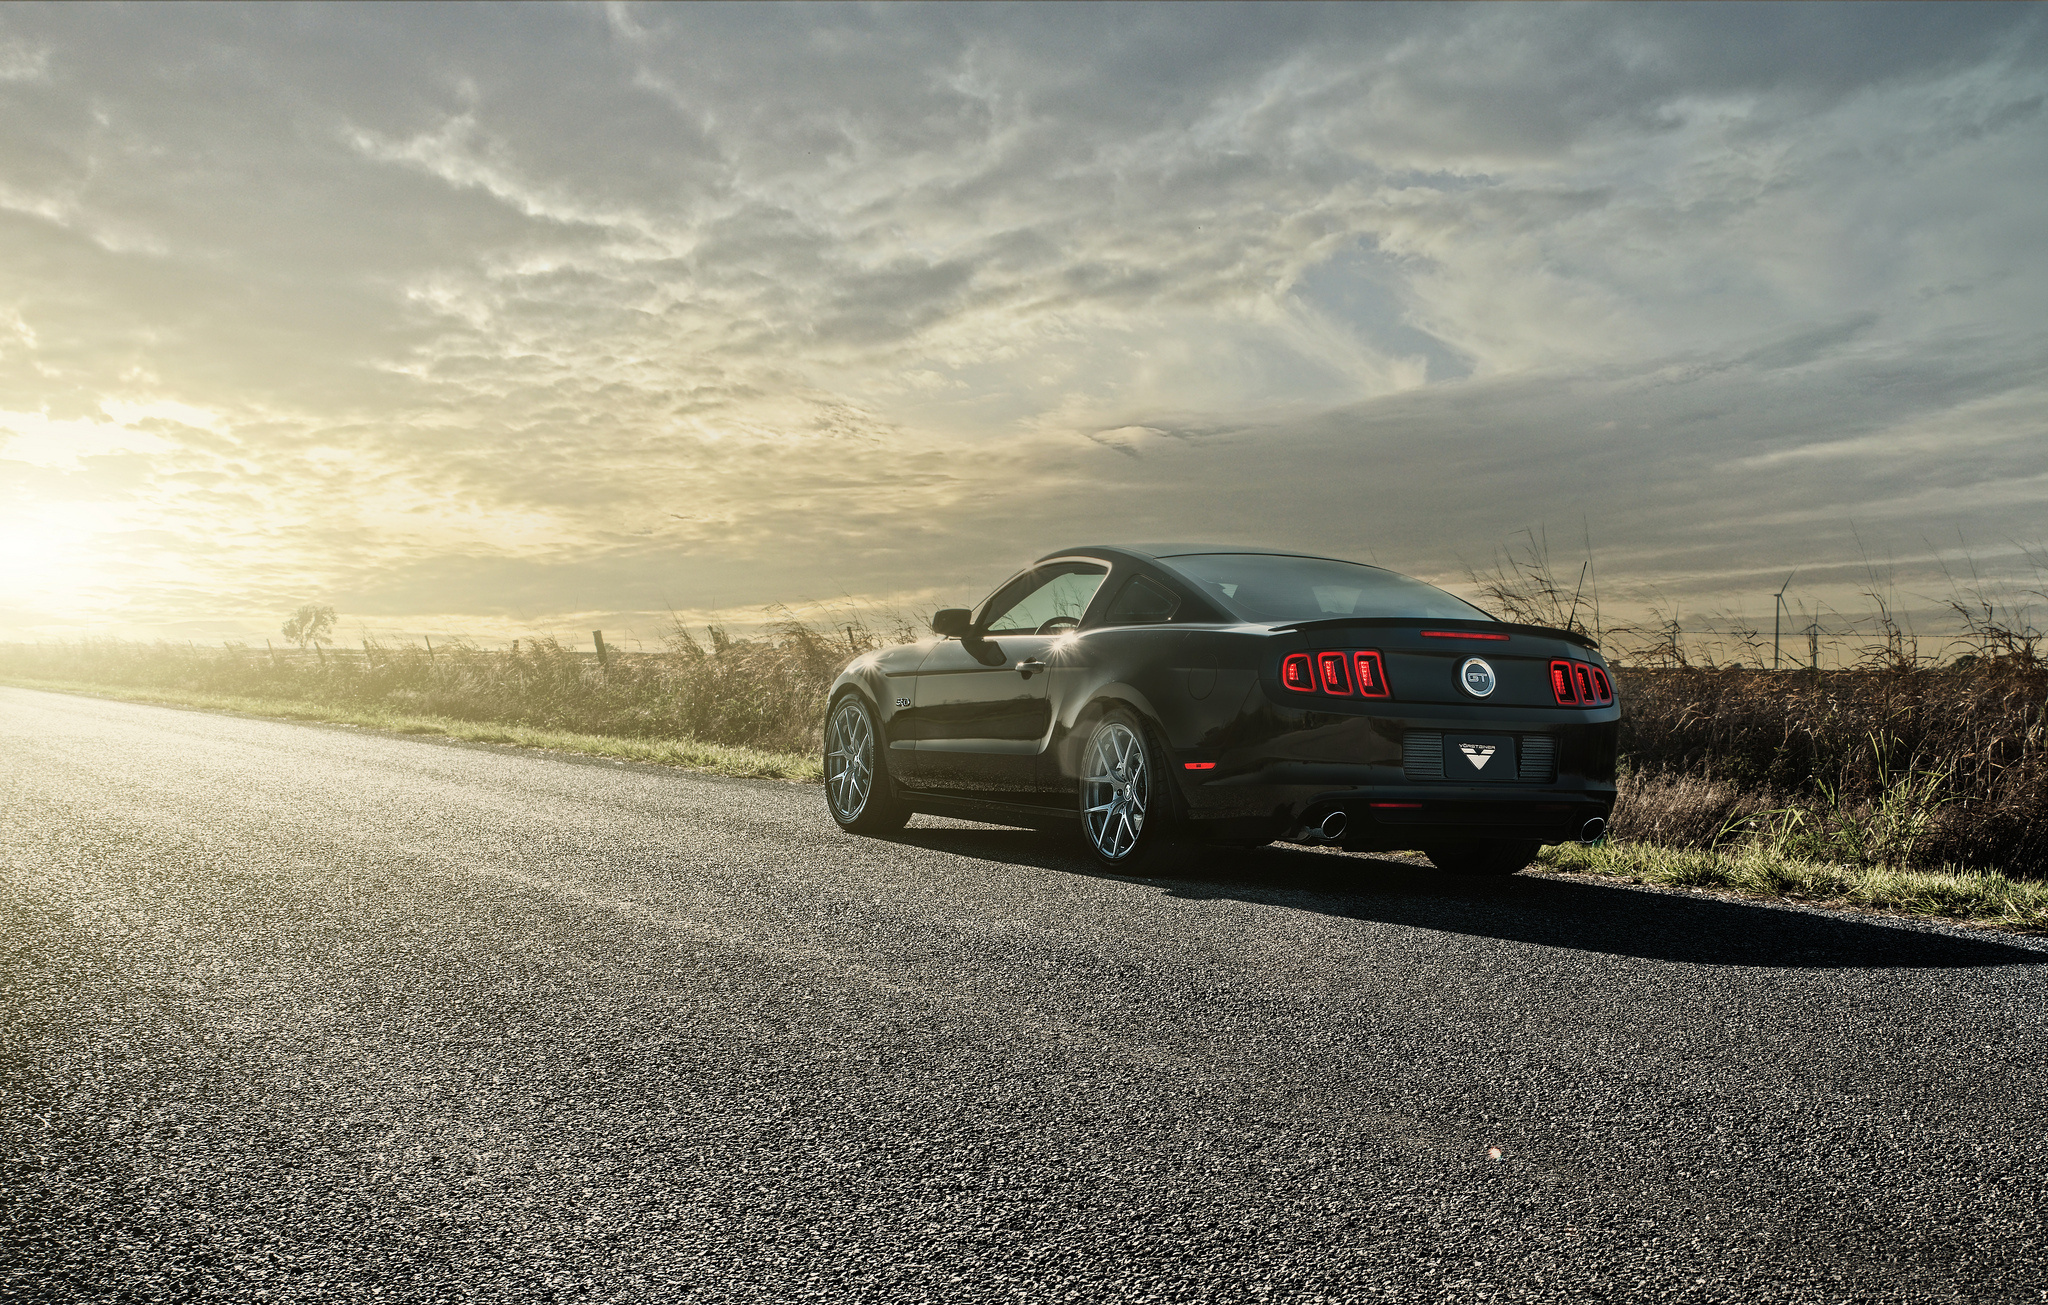 auto, mustang, cars, shine, light, road, back view, rear view, gt